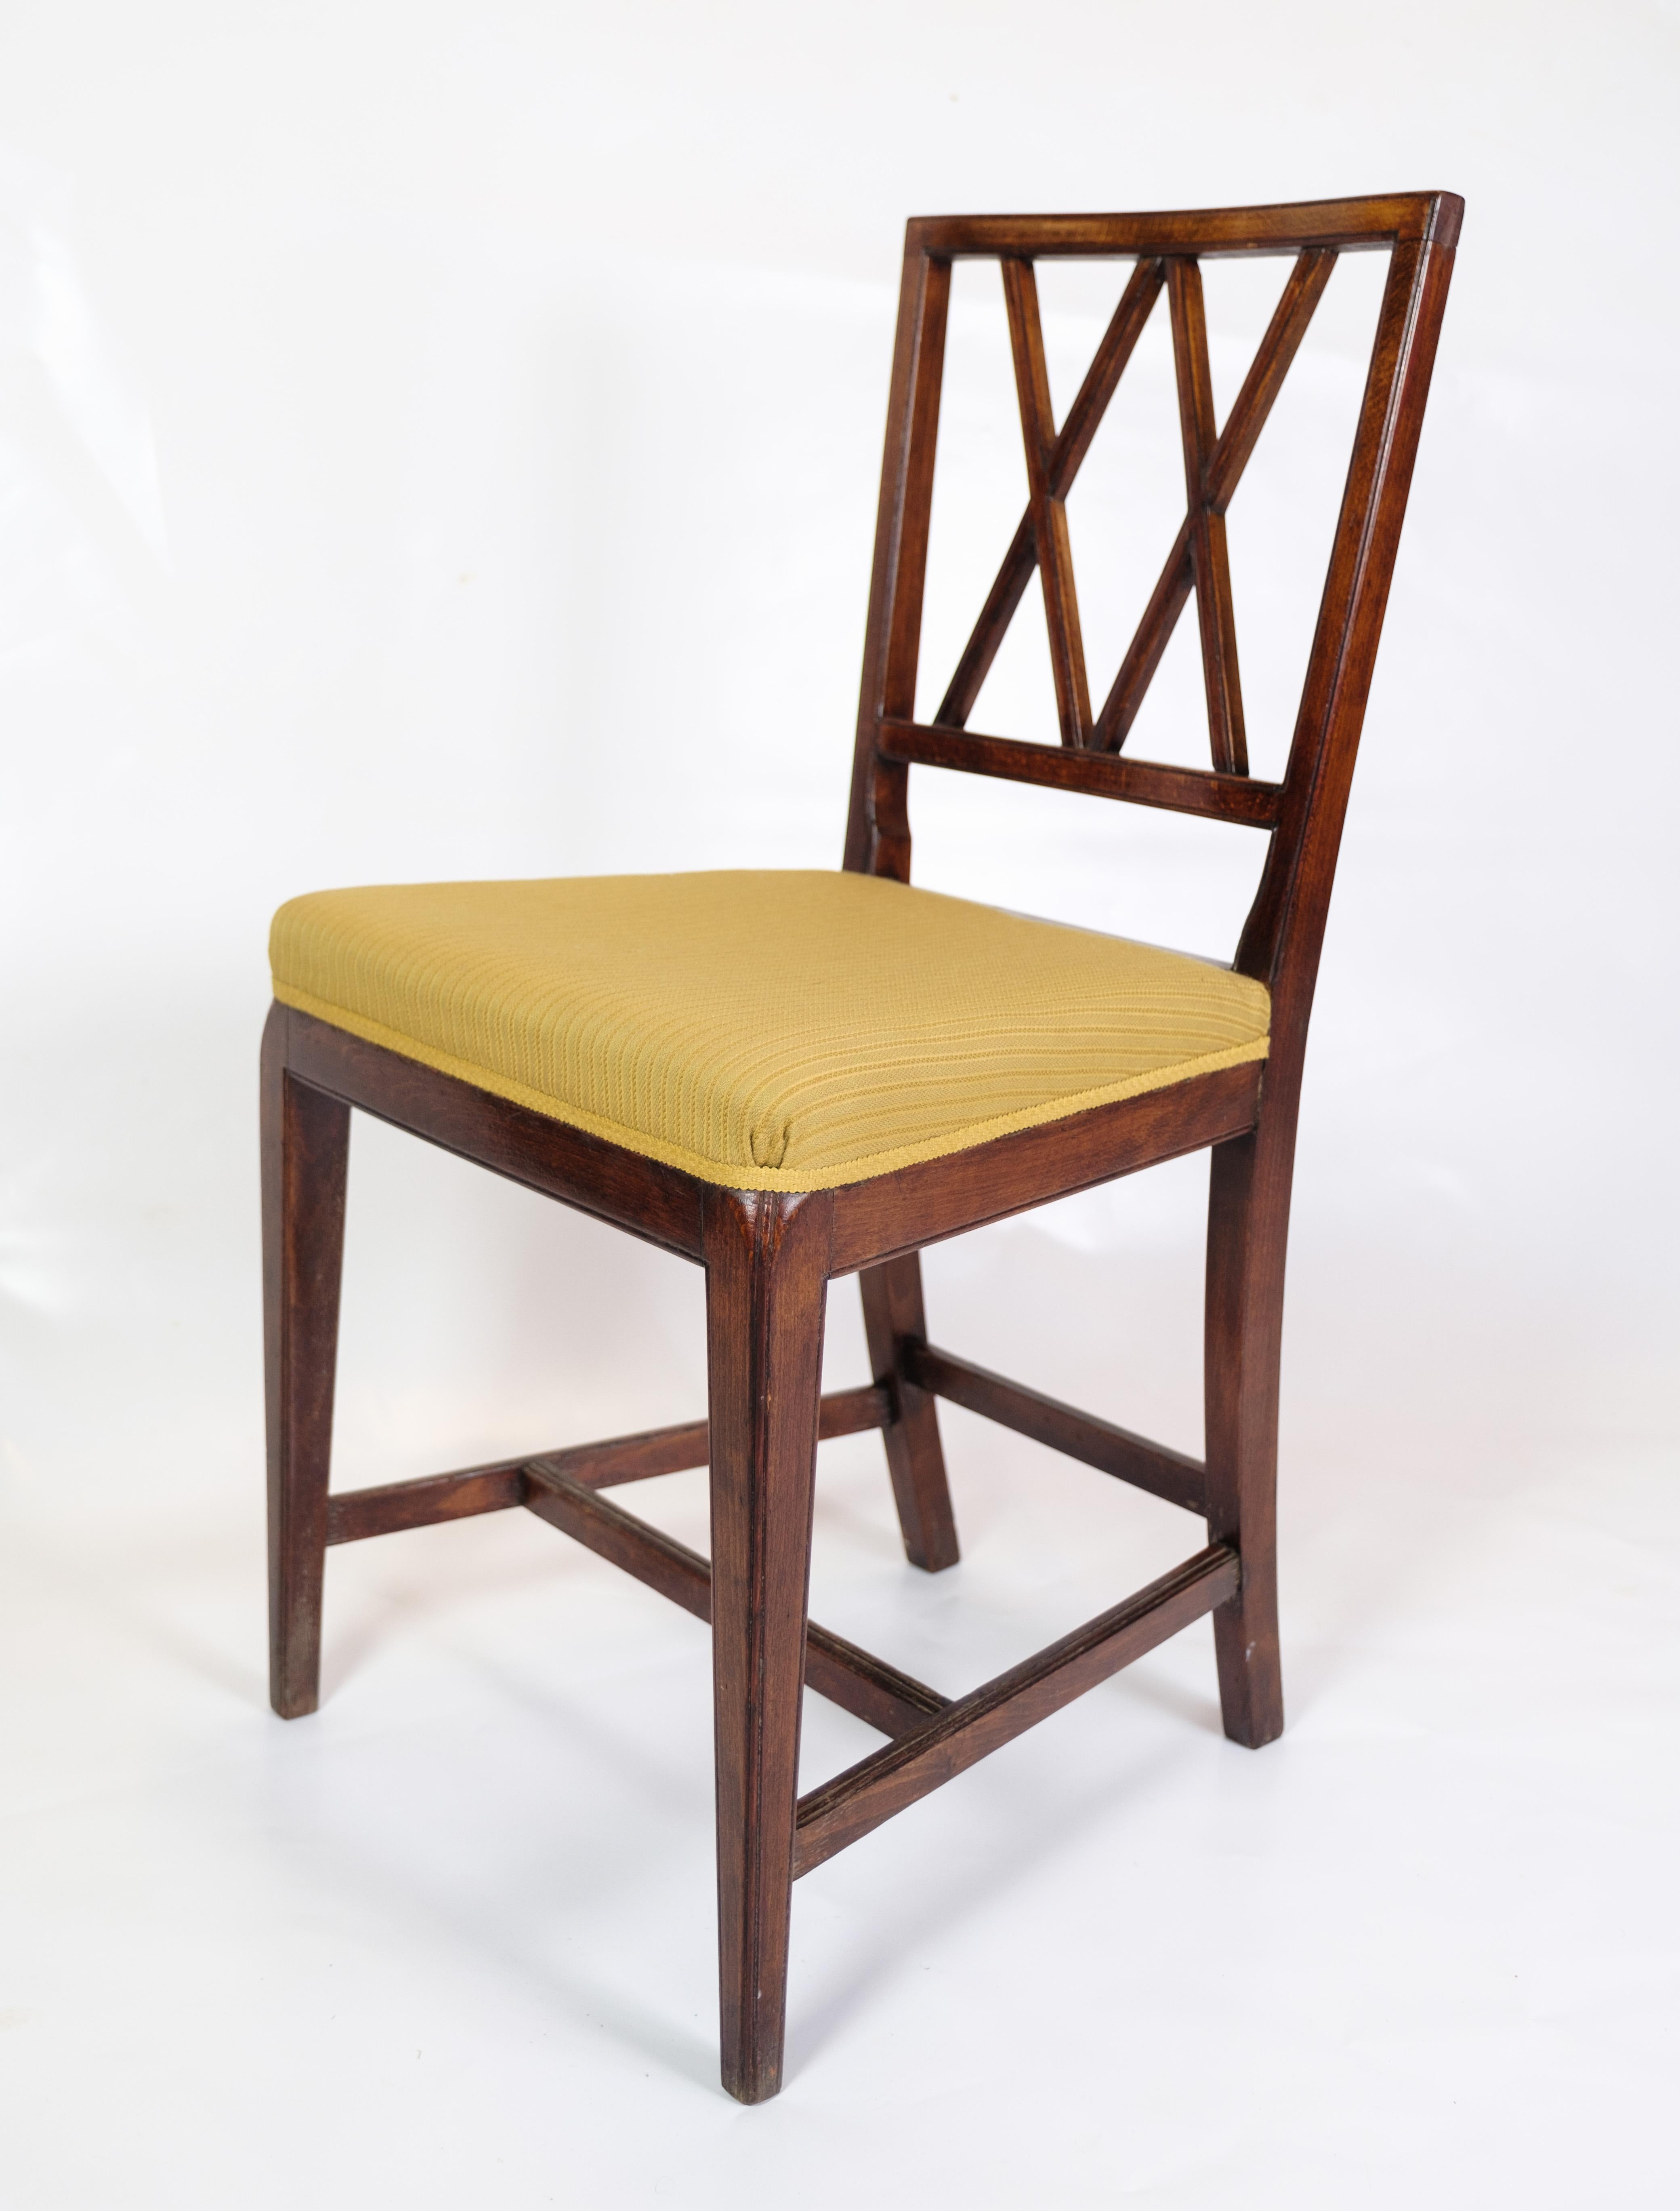 Mid-Century Modern Set of six Dining Chairs by Ole Wanscher for A.J. Iversen from 1950s.